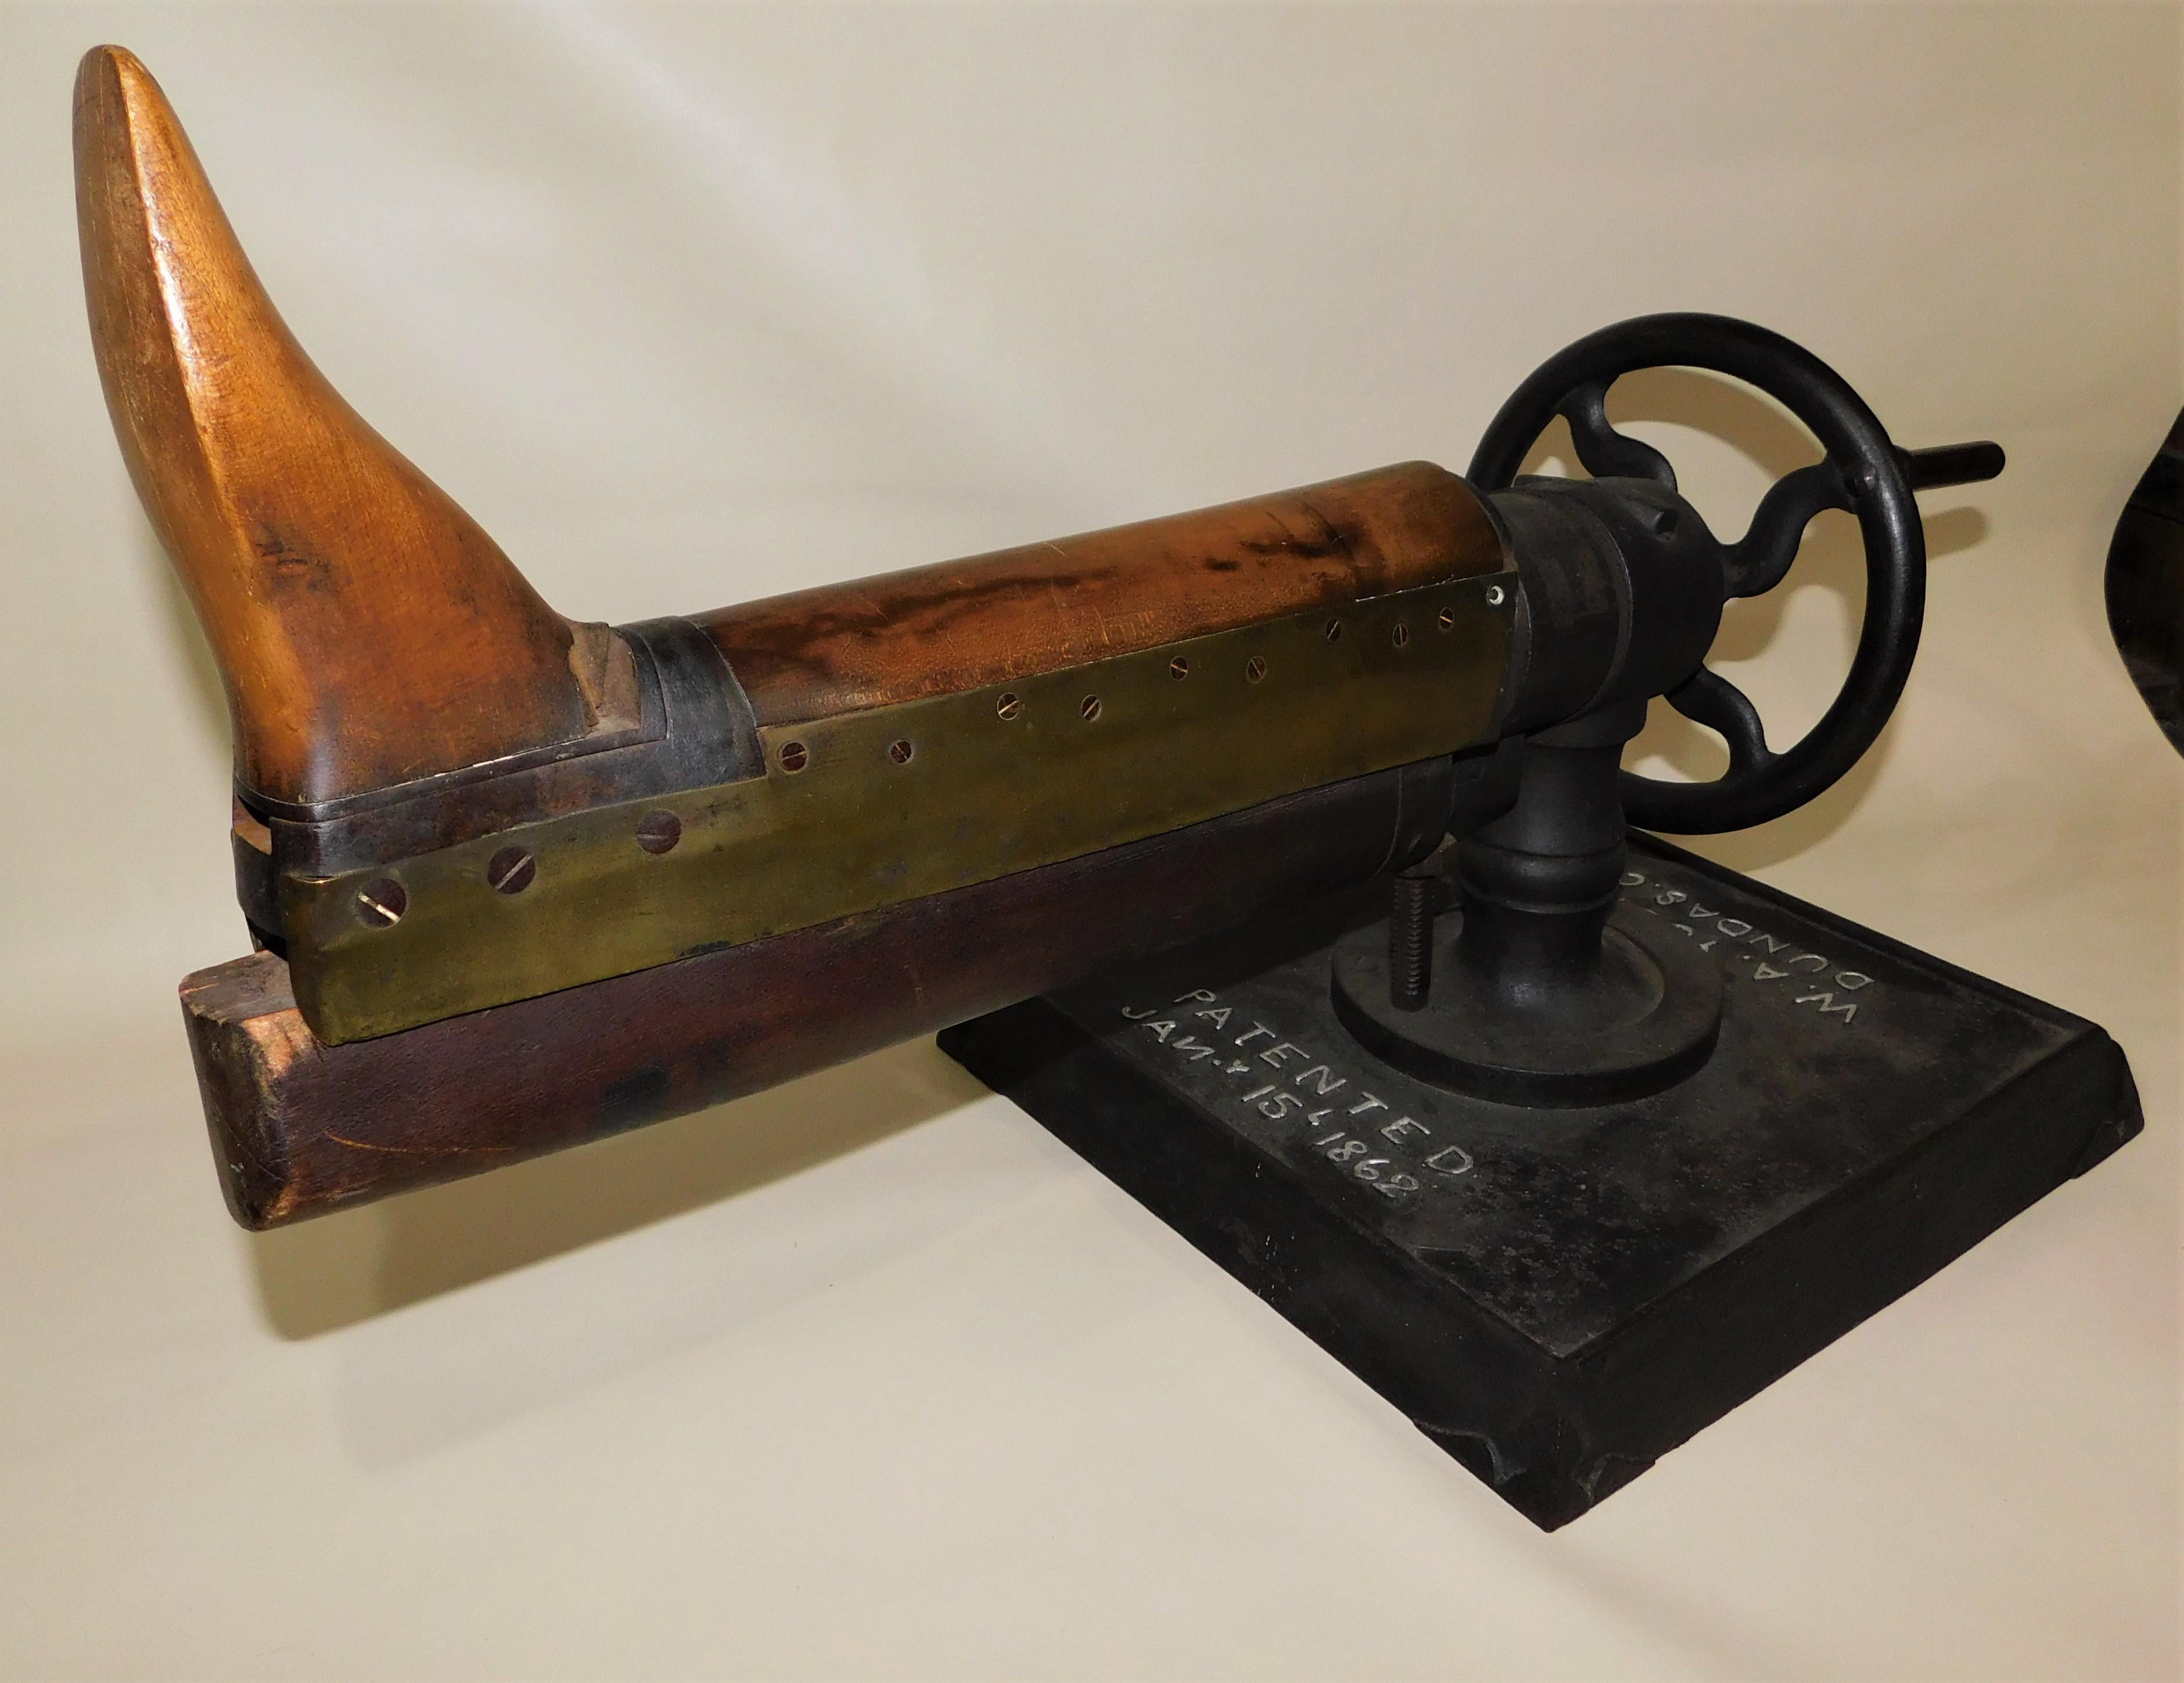 Fabulous unique early Victorian era W.A. Young Dundas (Ontario Canada) C.W. (Canada West) patented Jan. 15 1862 Industrial use leather boot/shoe stretcher. Black painted wrought iron base, wheel and mechanism, brass fittings and wood mold, a